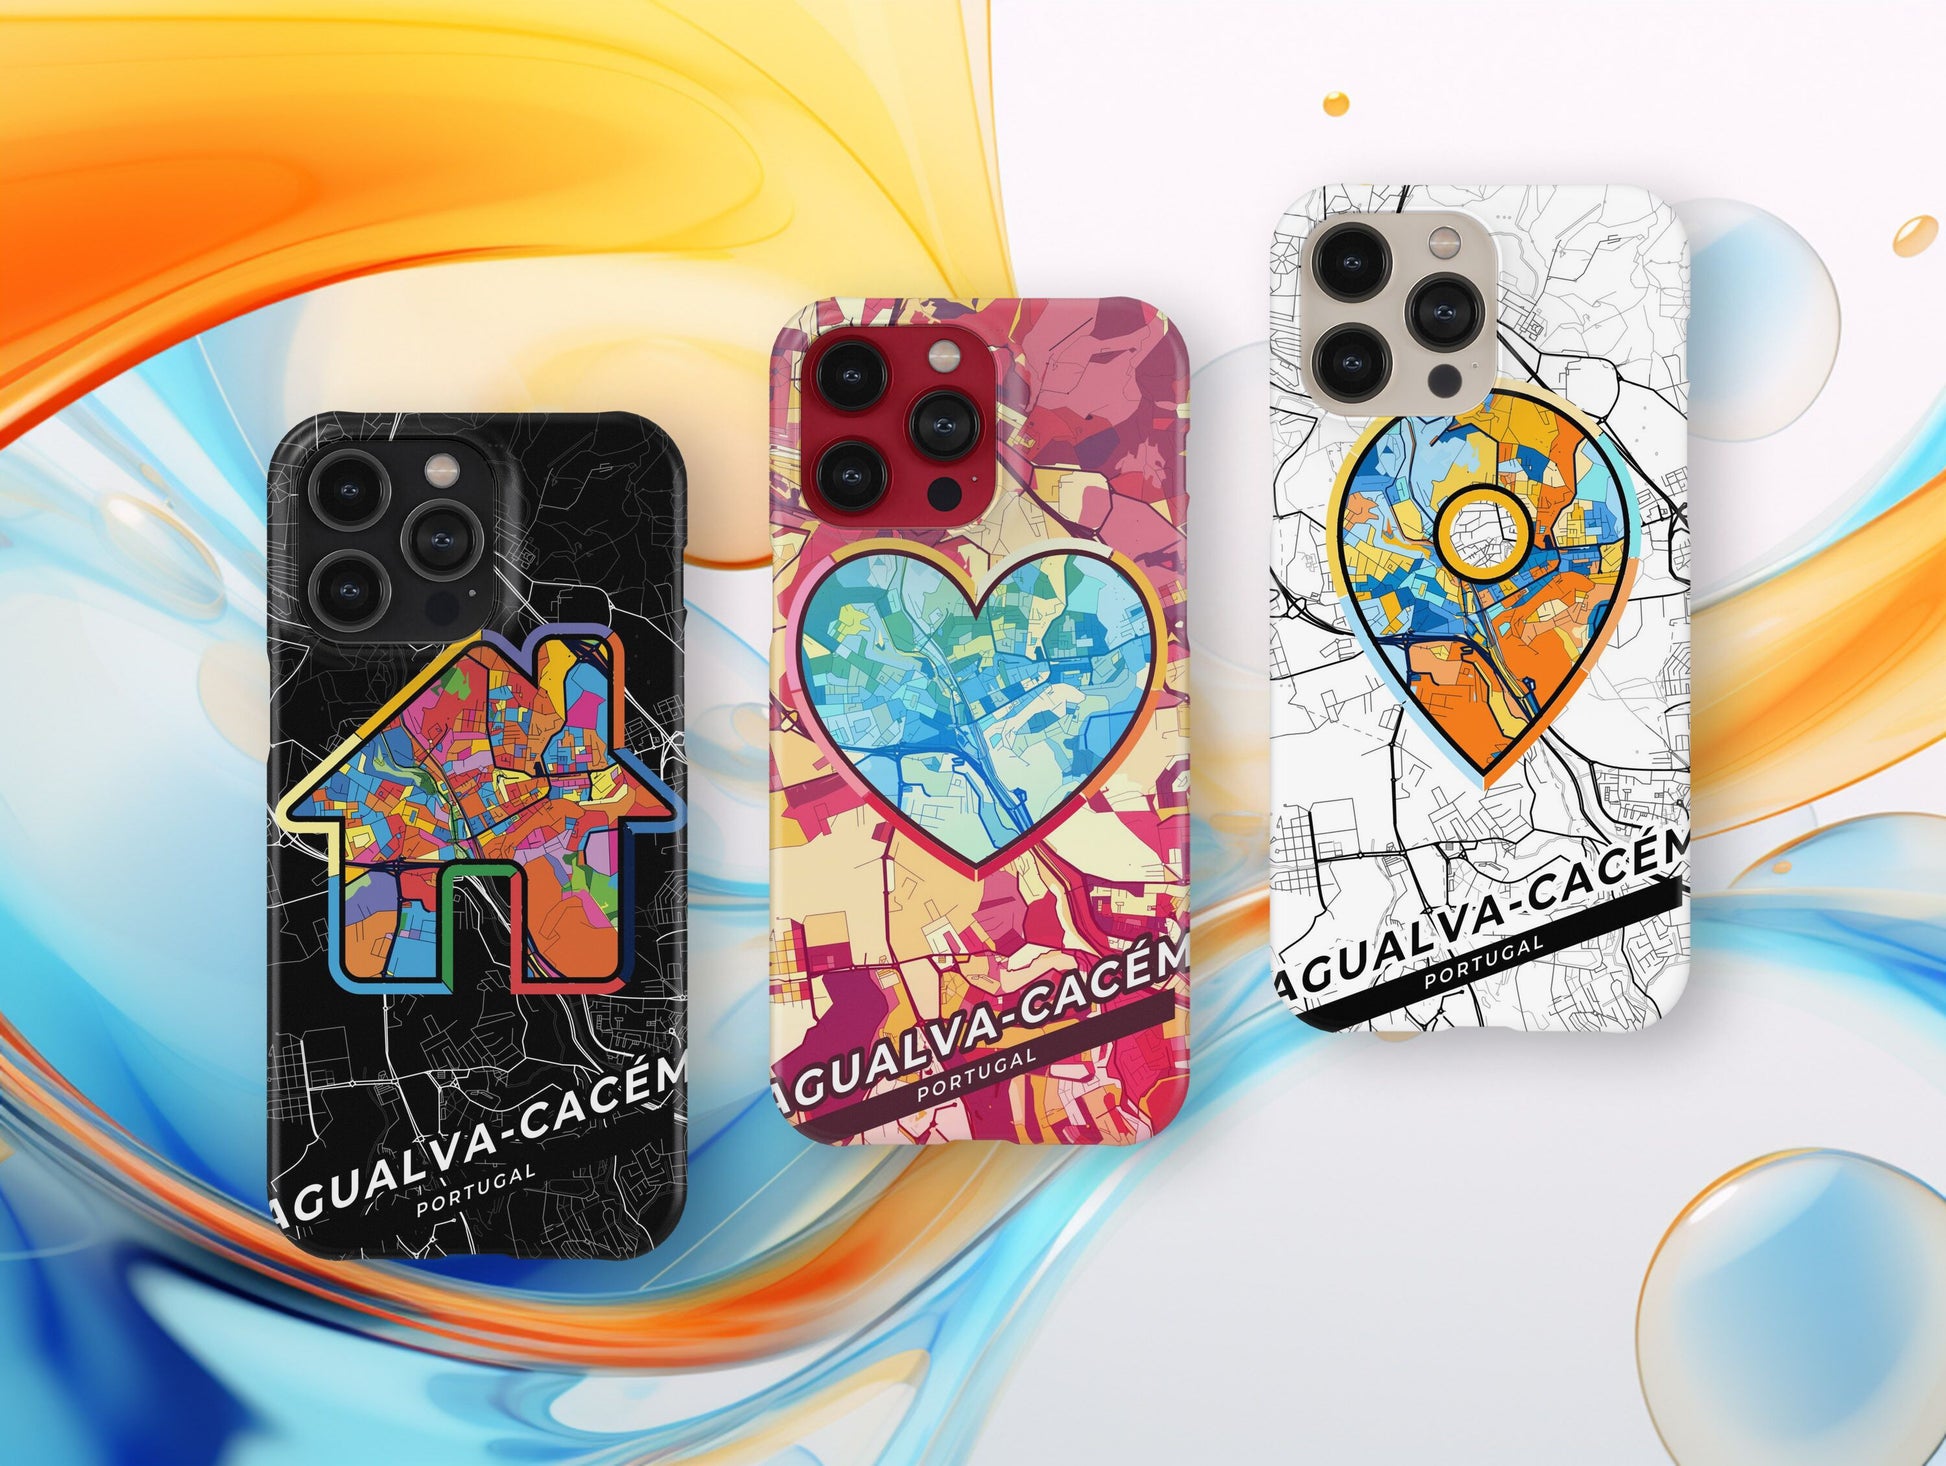 Agualva-Cacém Portugal slim phone case with colorful icon. Birthday, wedding or housewarming gift. Couple match cases.